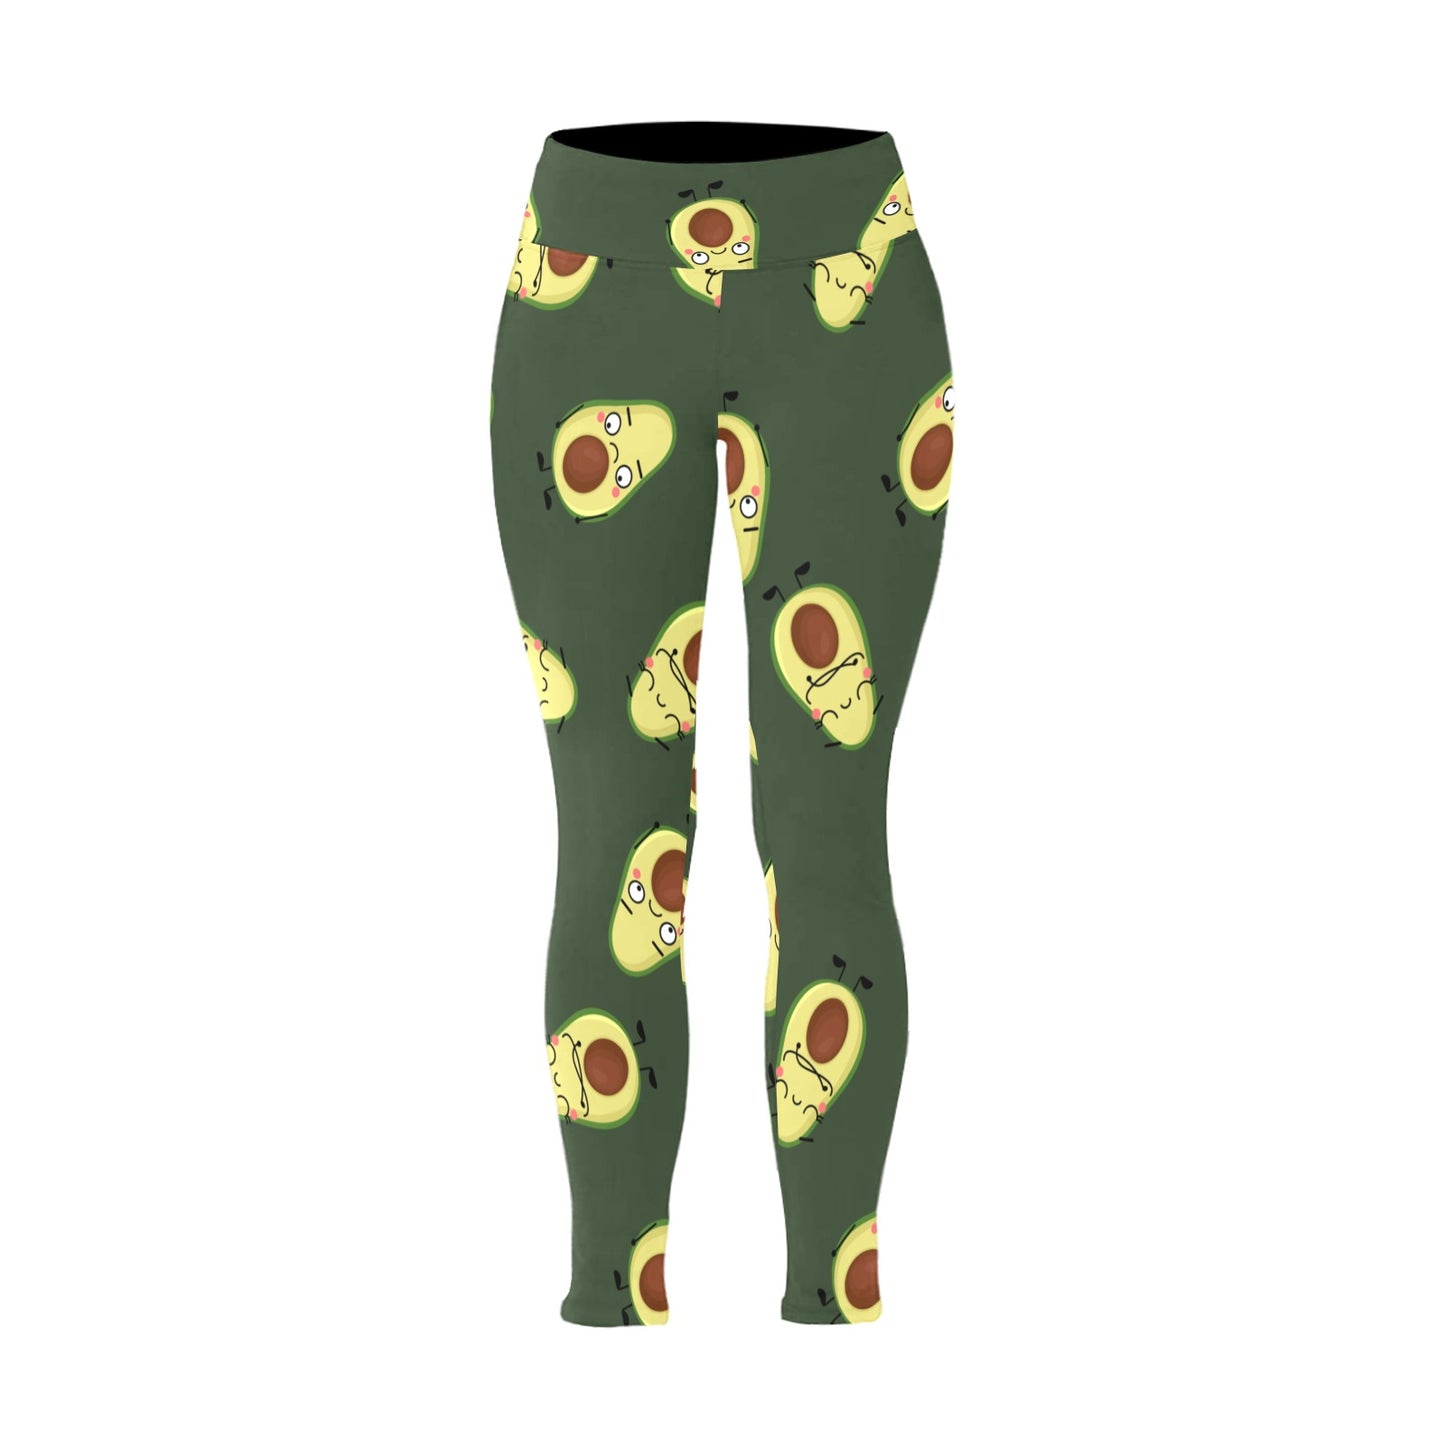 Avocado Characters - Women's Plus Size High Waist Leggings Women's Plus Size High Waist Leggings